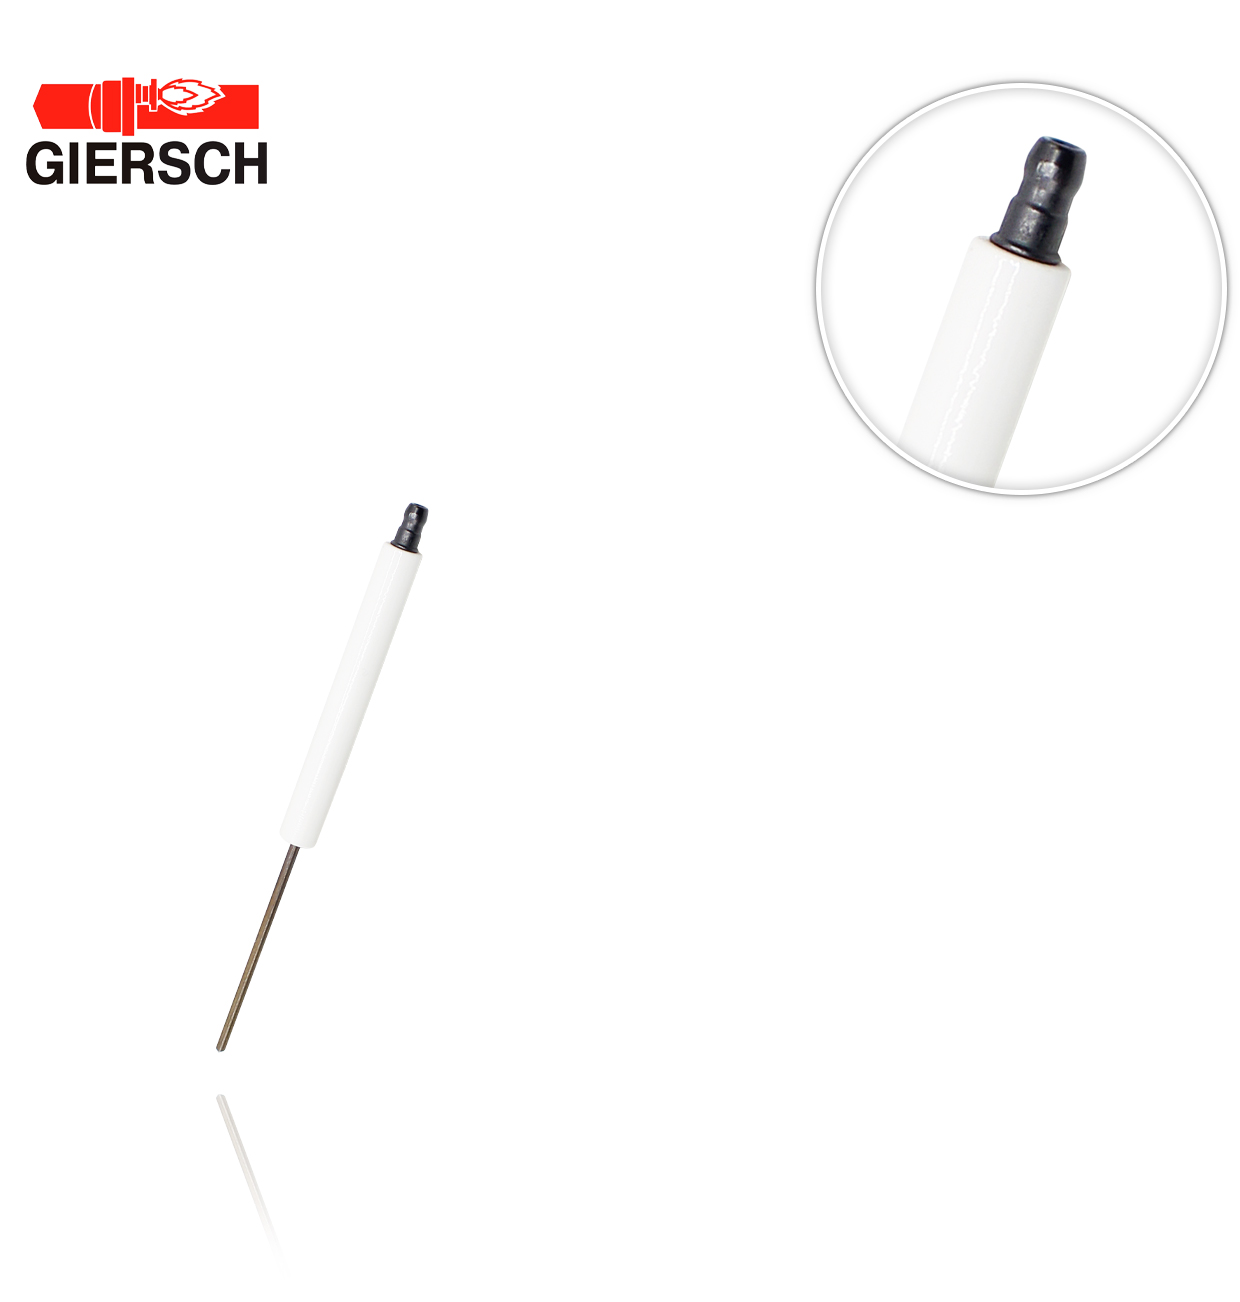 GIERSCH IONISATION ELECTRODE FOR MG1/MG2